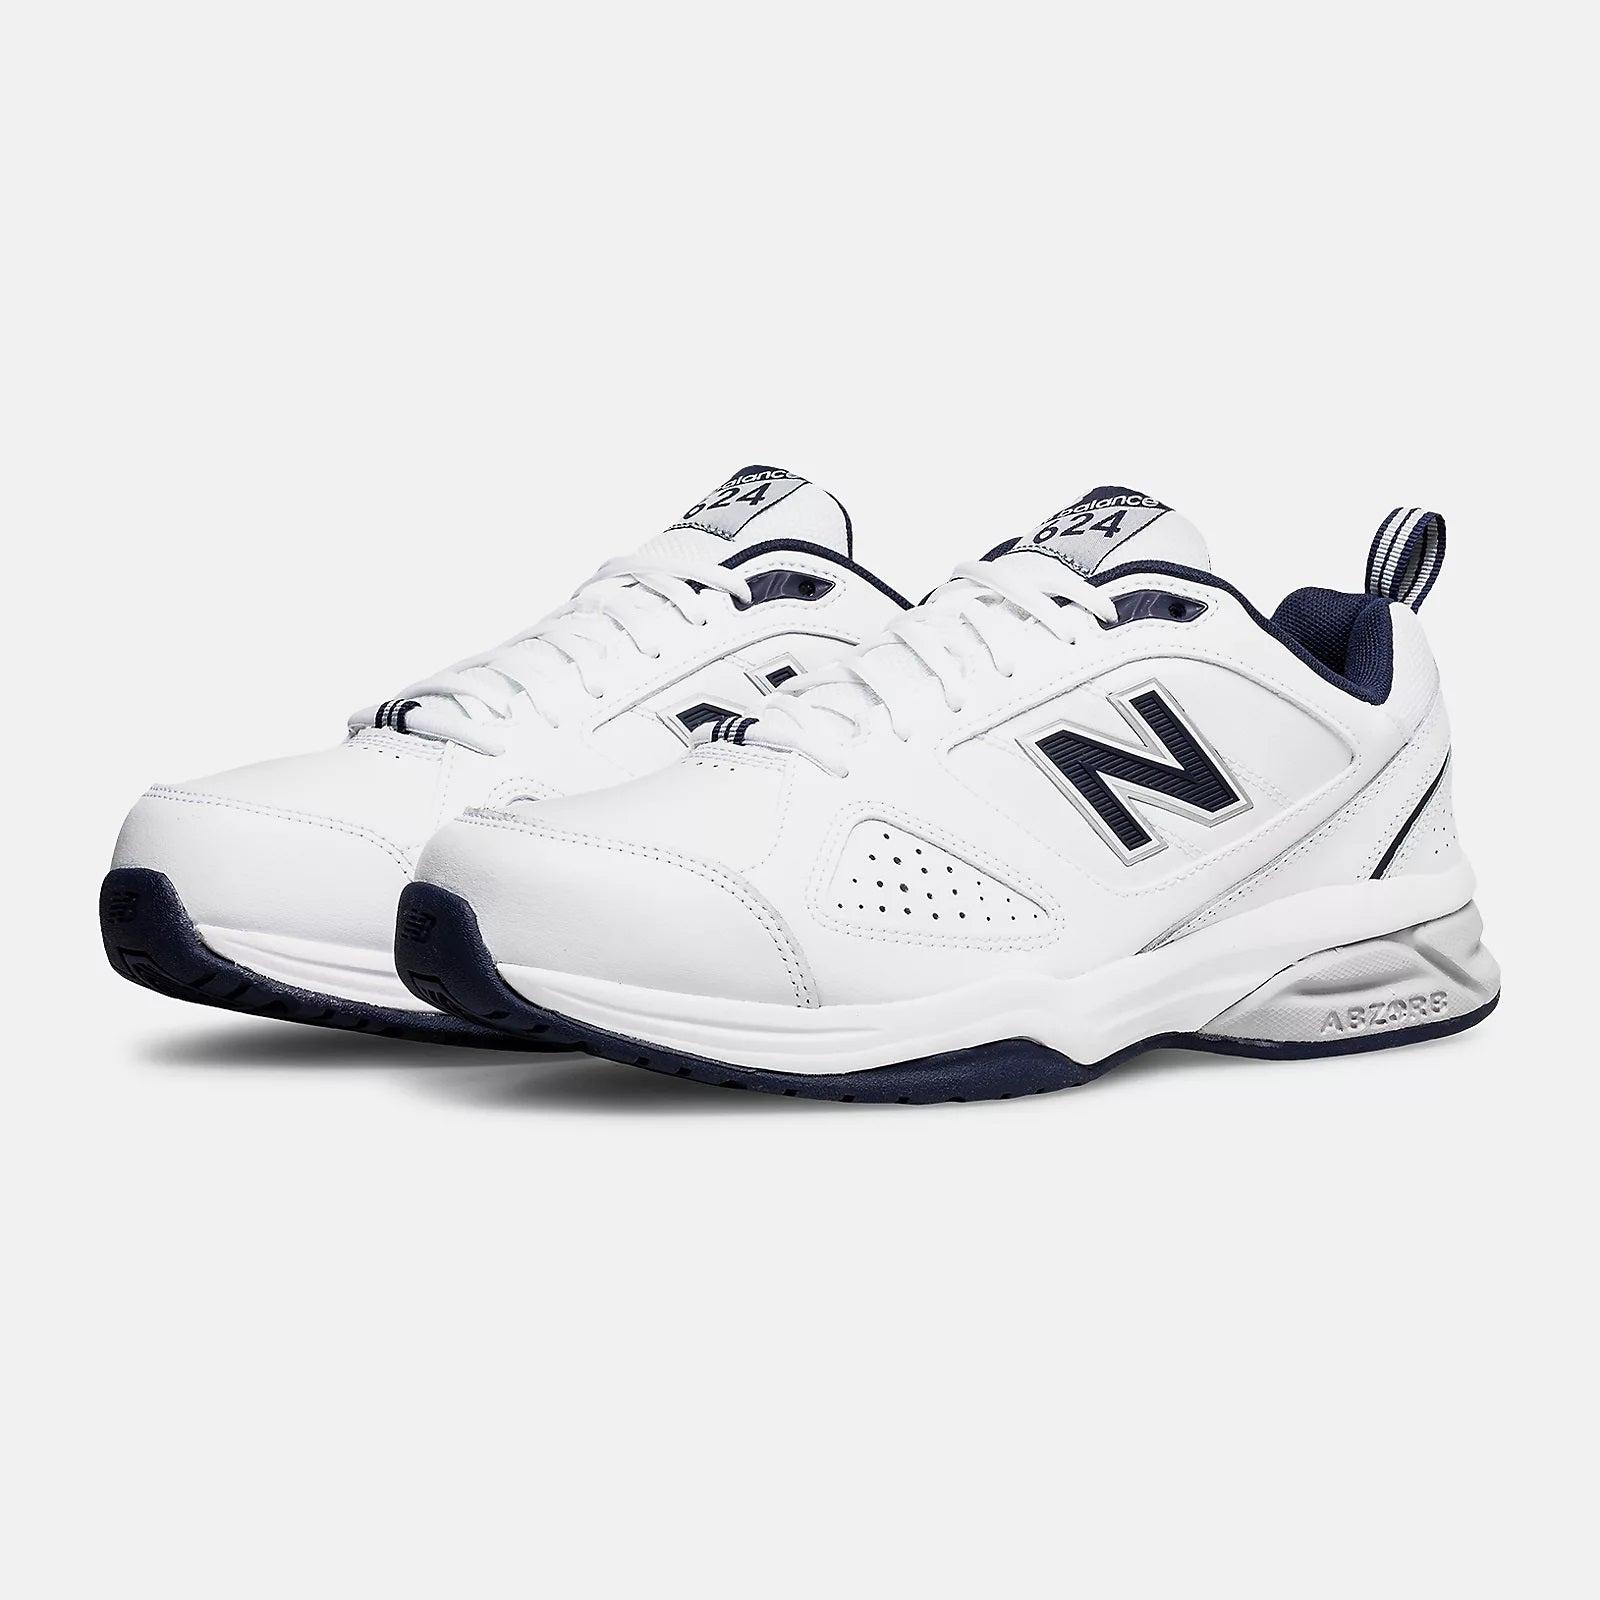 New Balance S Wide Fit Mx624wn4 Trainers in White | Lyst